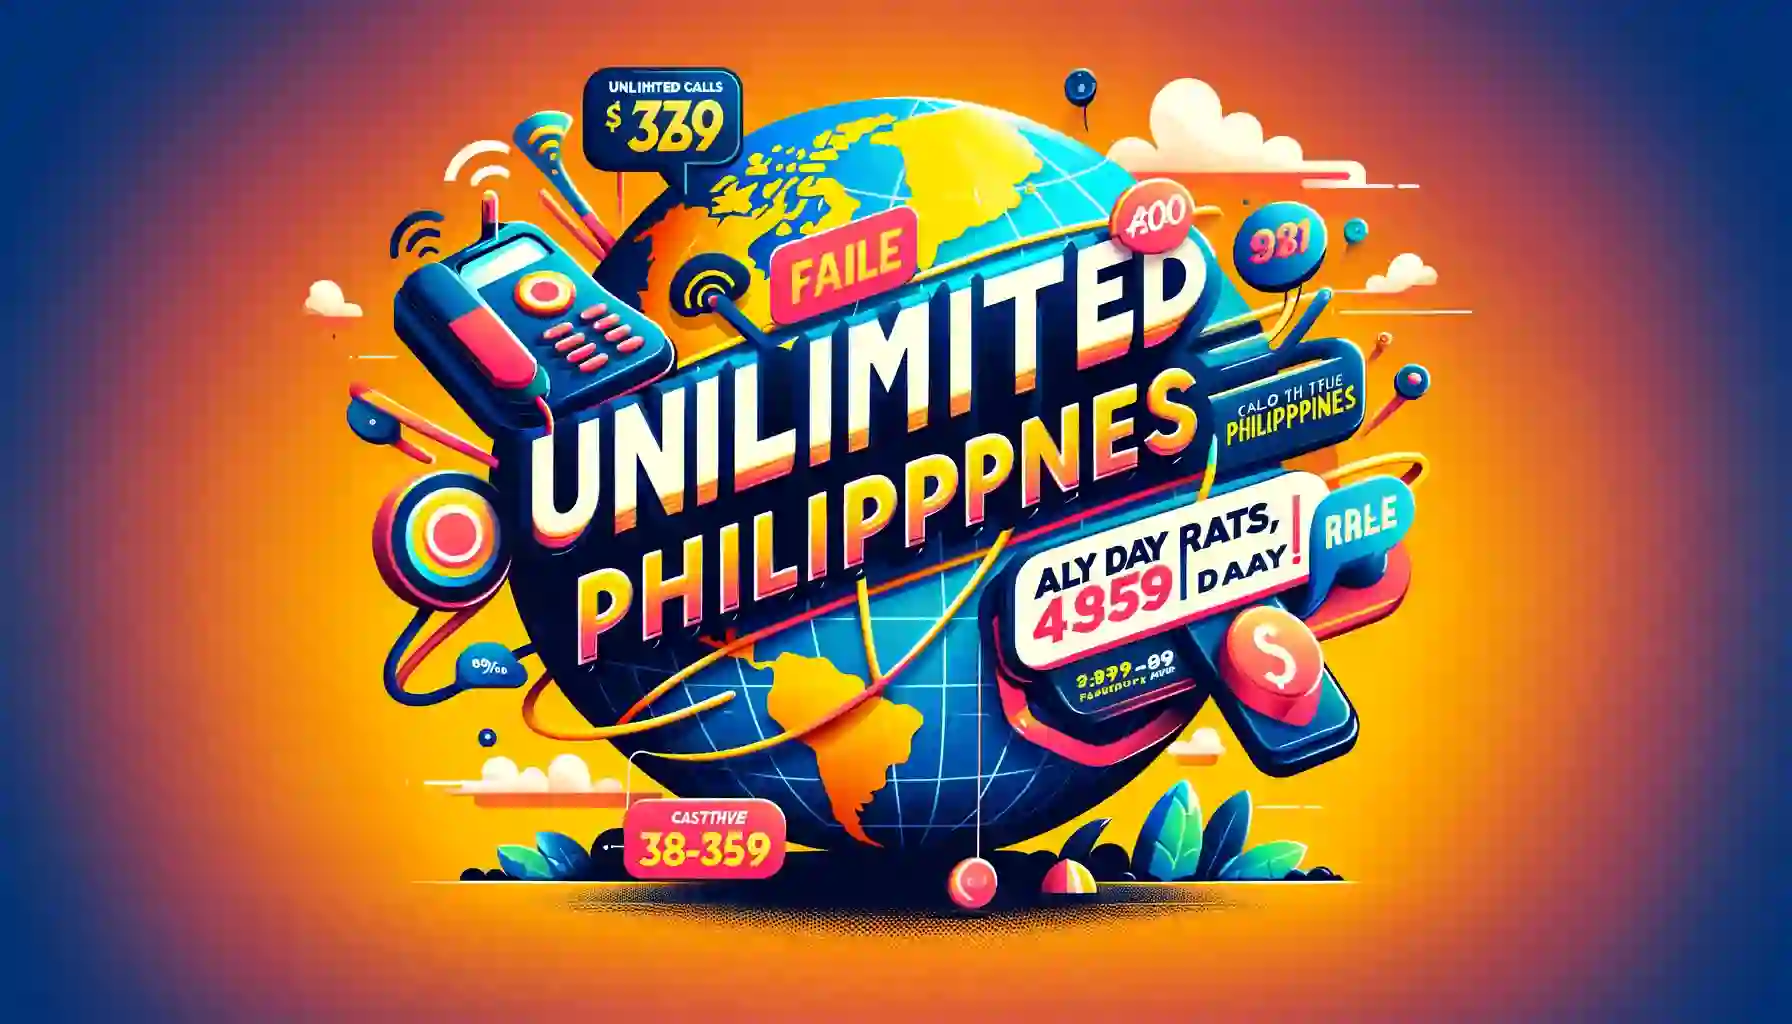 Cheap Calling Plans for Unlimited Calls to Philippines